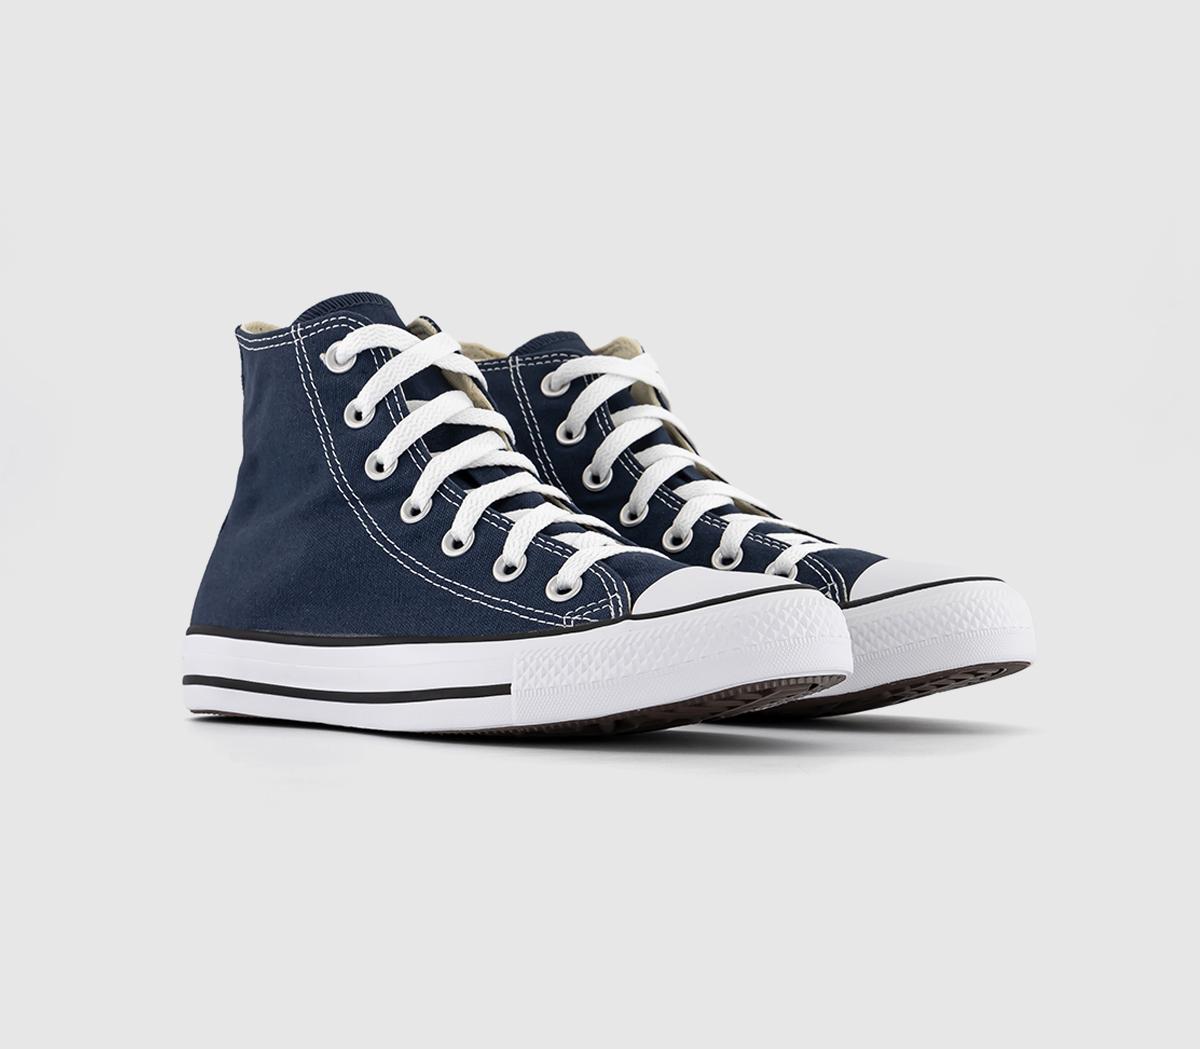 Mens Converse All Star Hi Navy Canvas Trainers Blue/White, 3.5